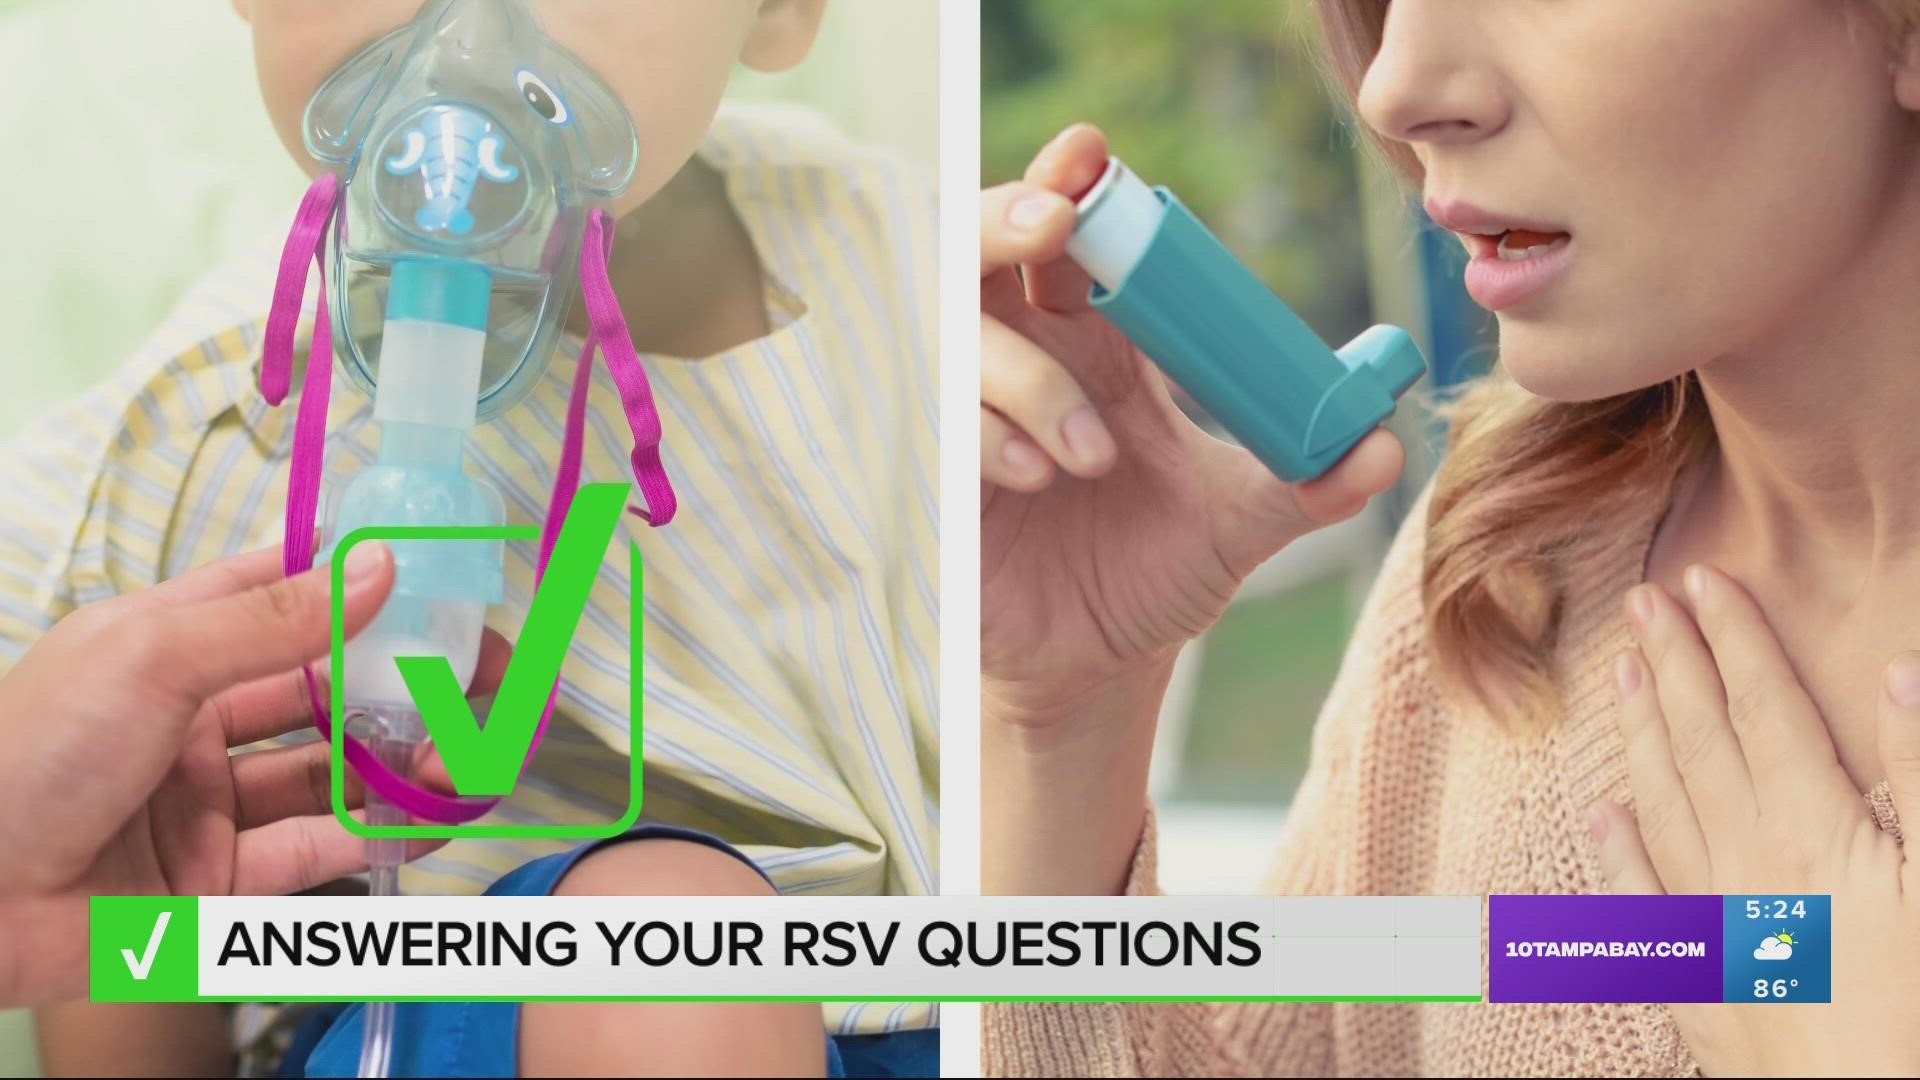 It's not clear whether RSV in children has long-term effects.